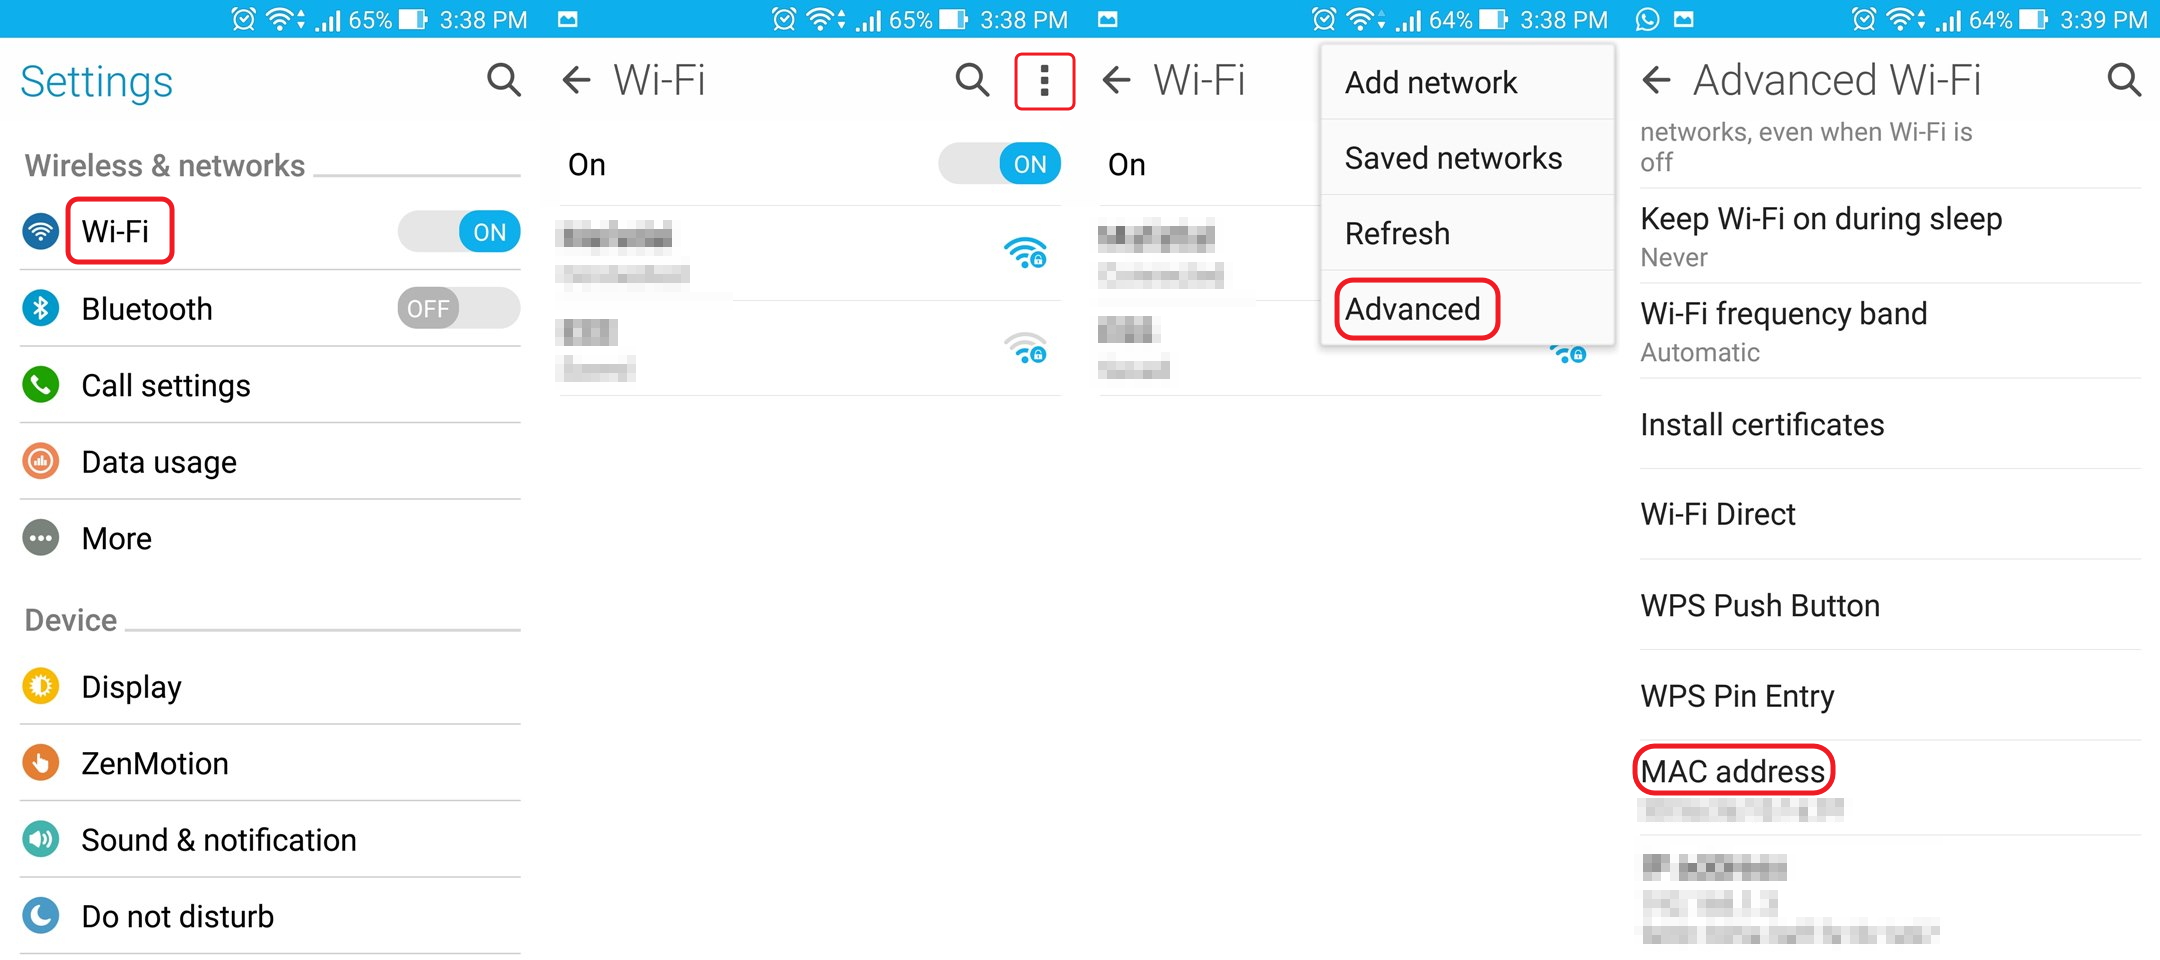 find android mac address